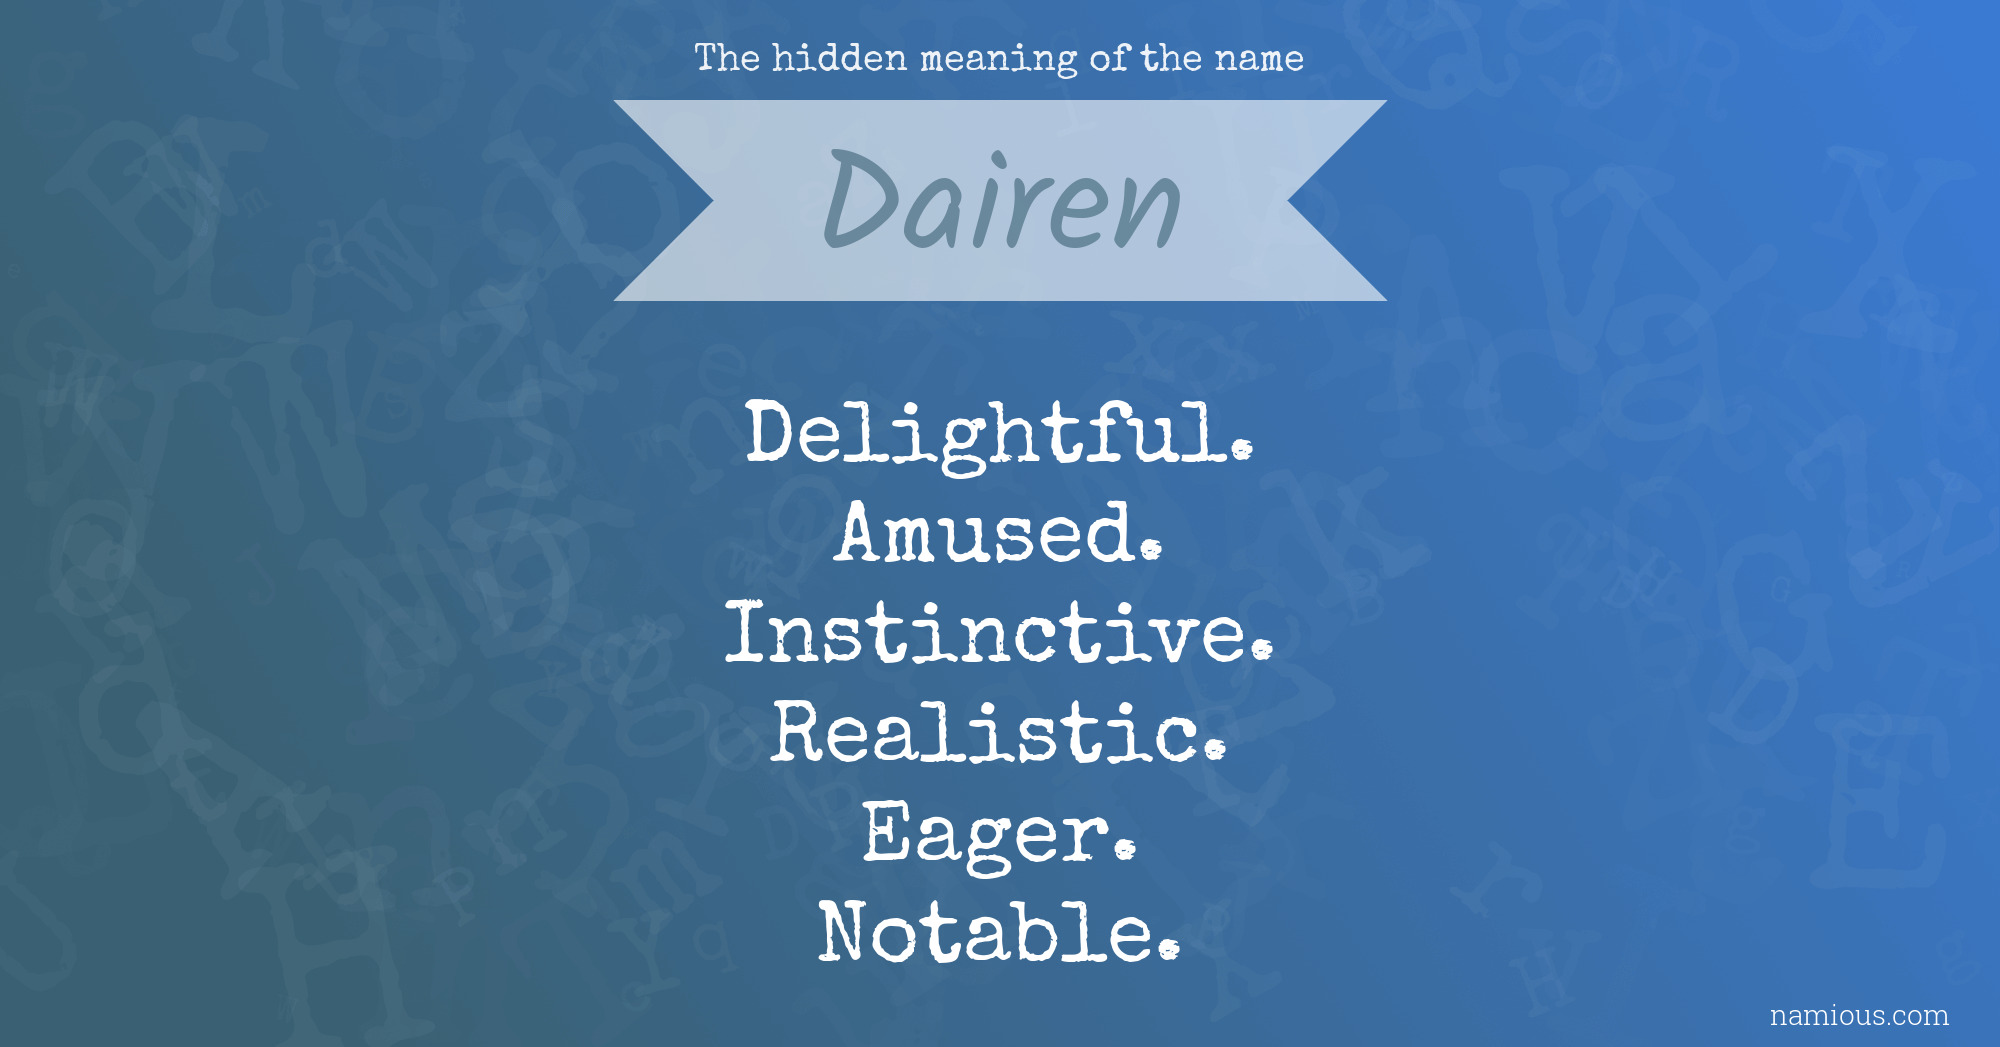 The hidden meaning of the name Dairen